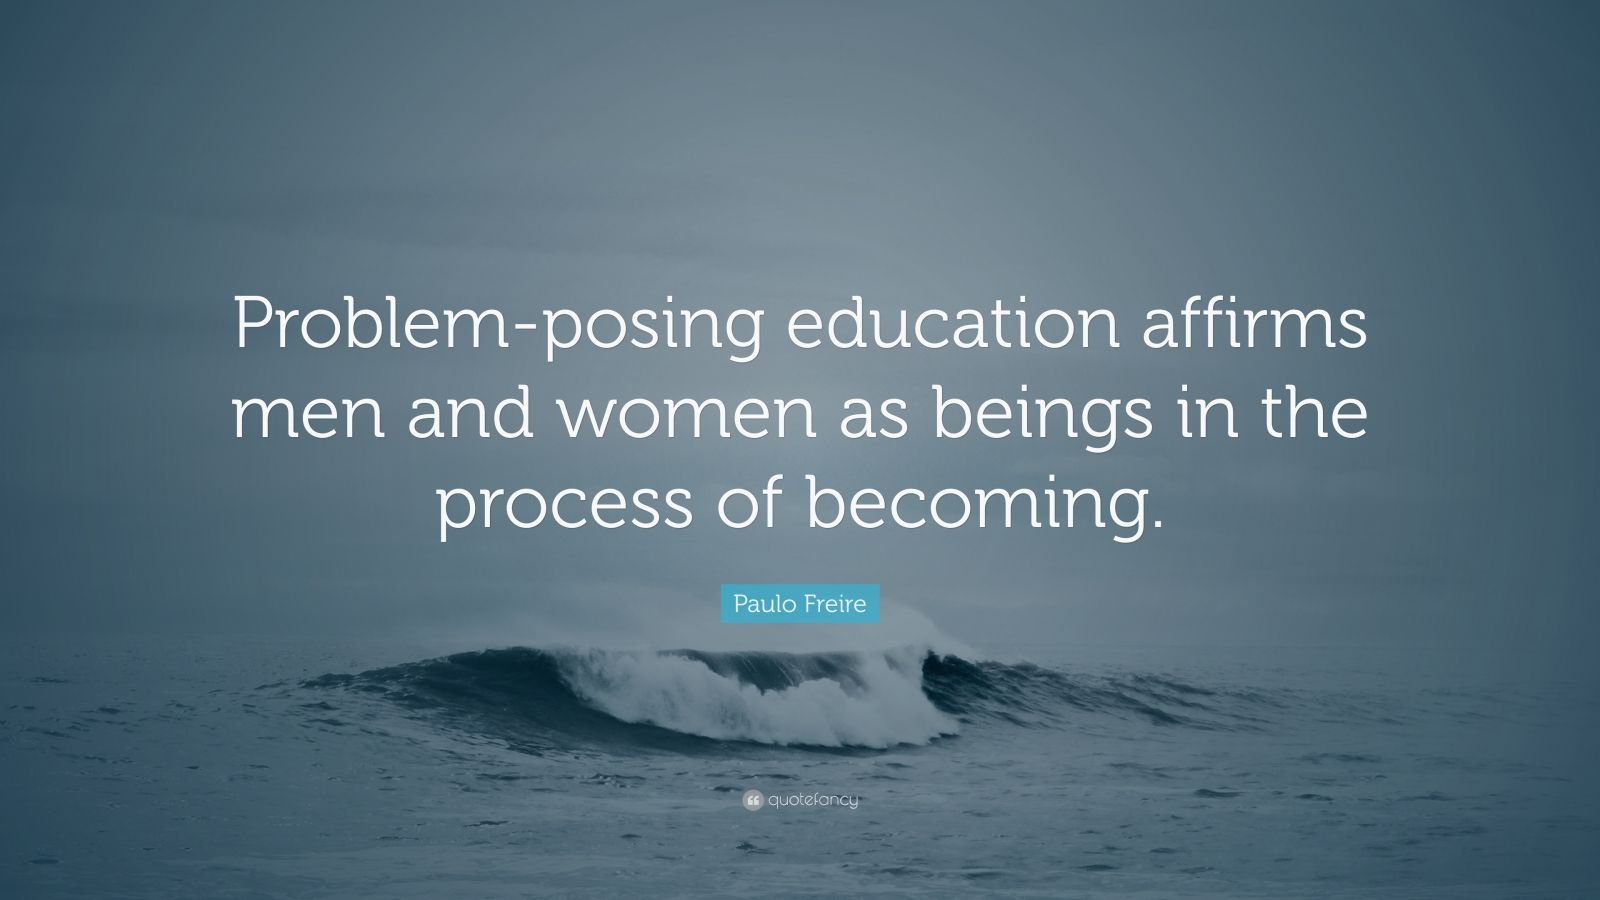 Paulo Freire Quote: “Problem-posing education affirms men and women as